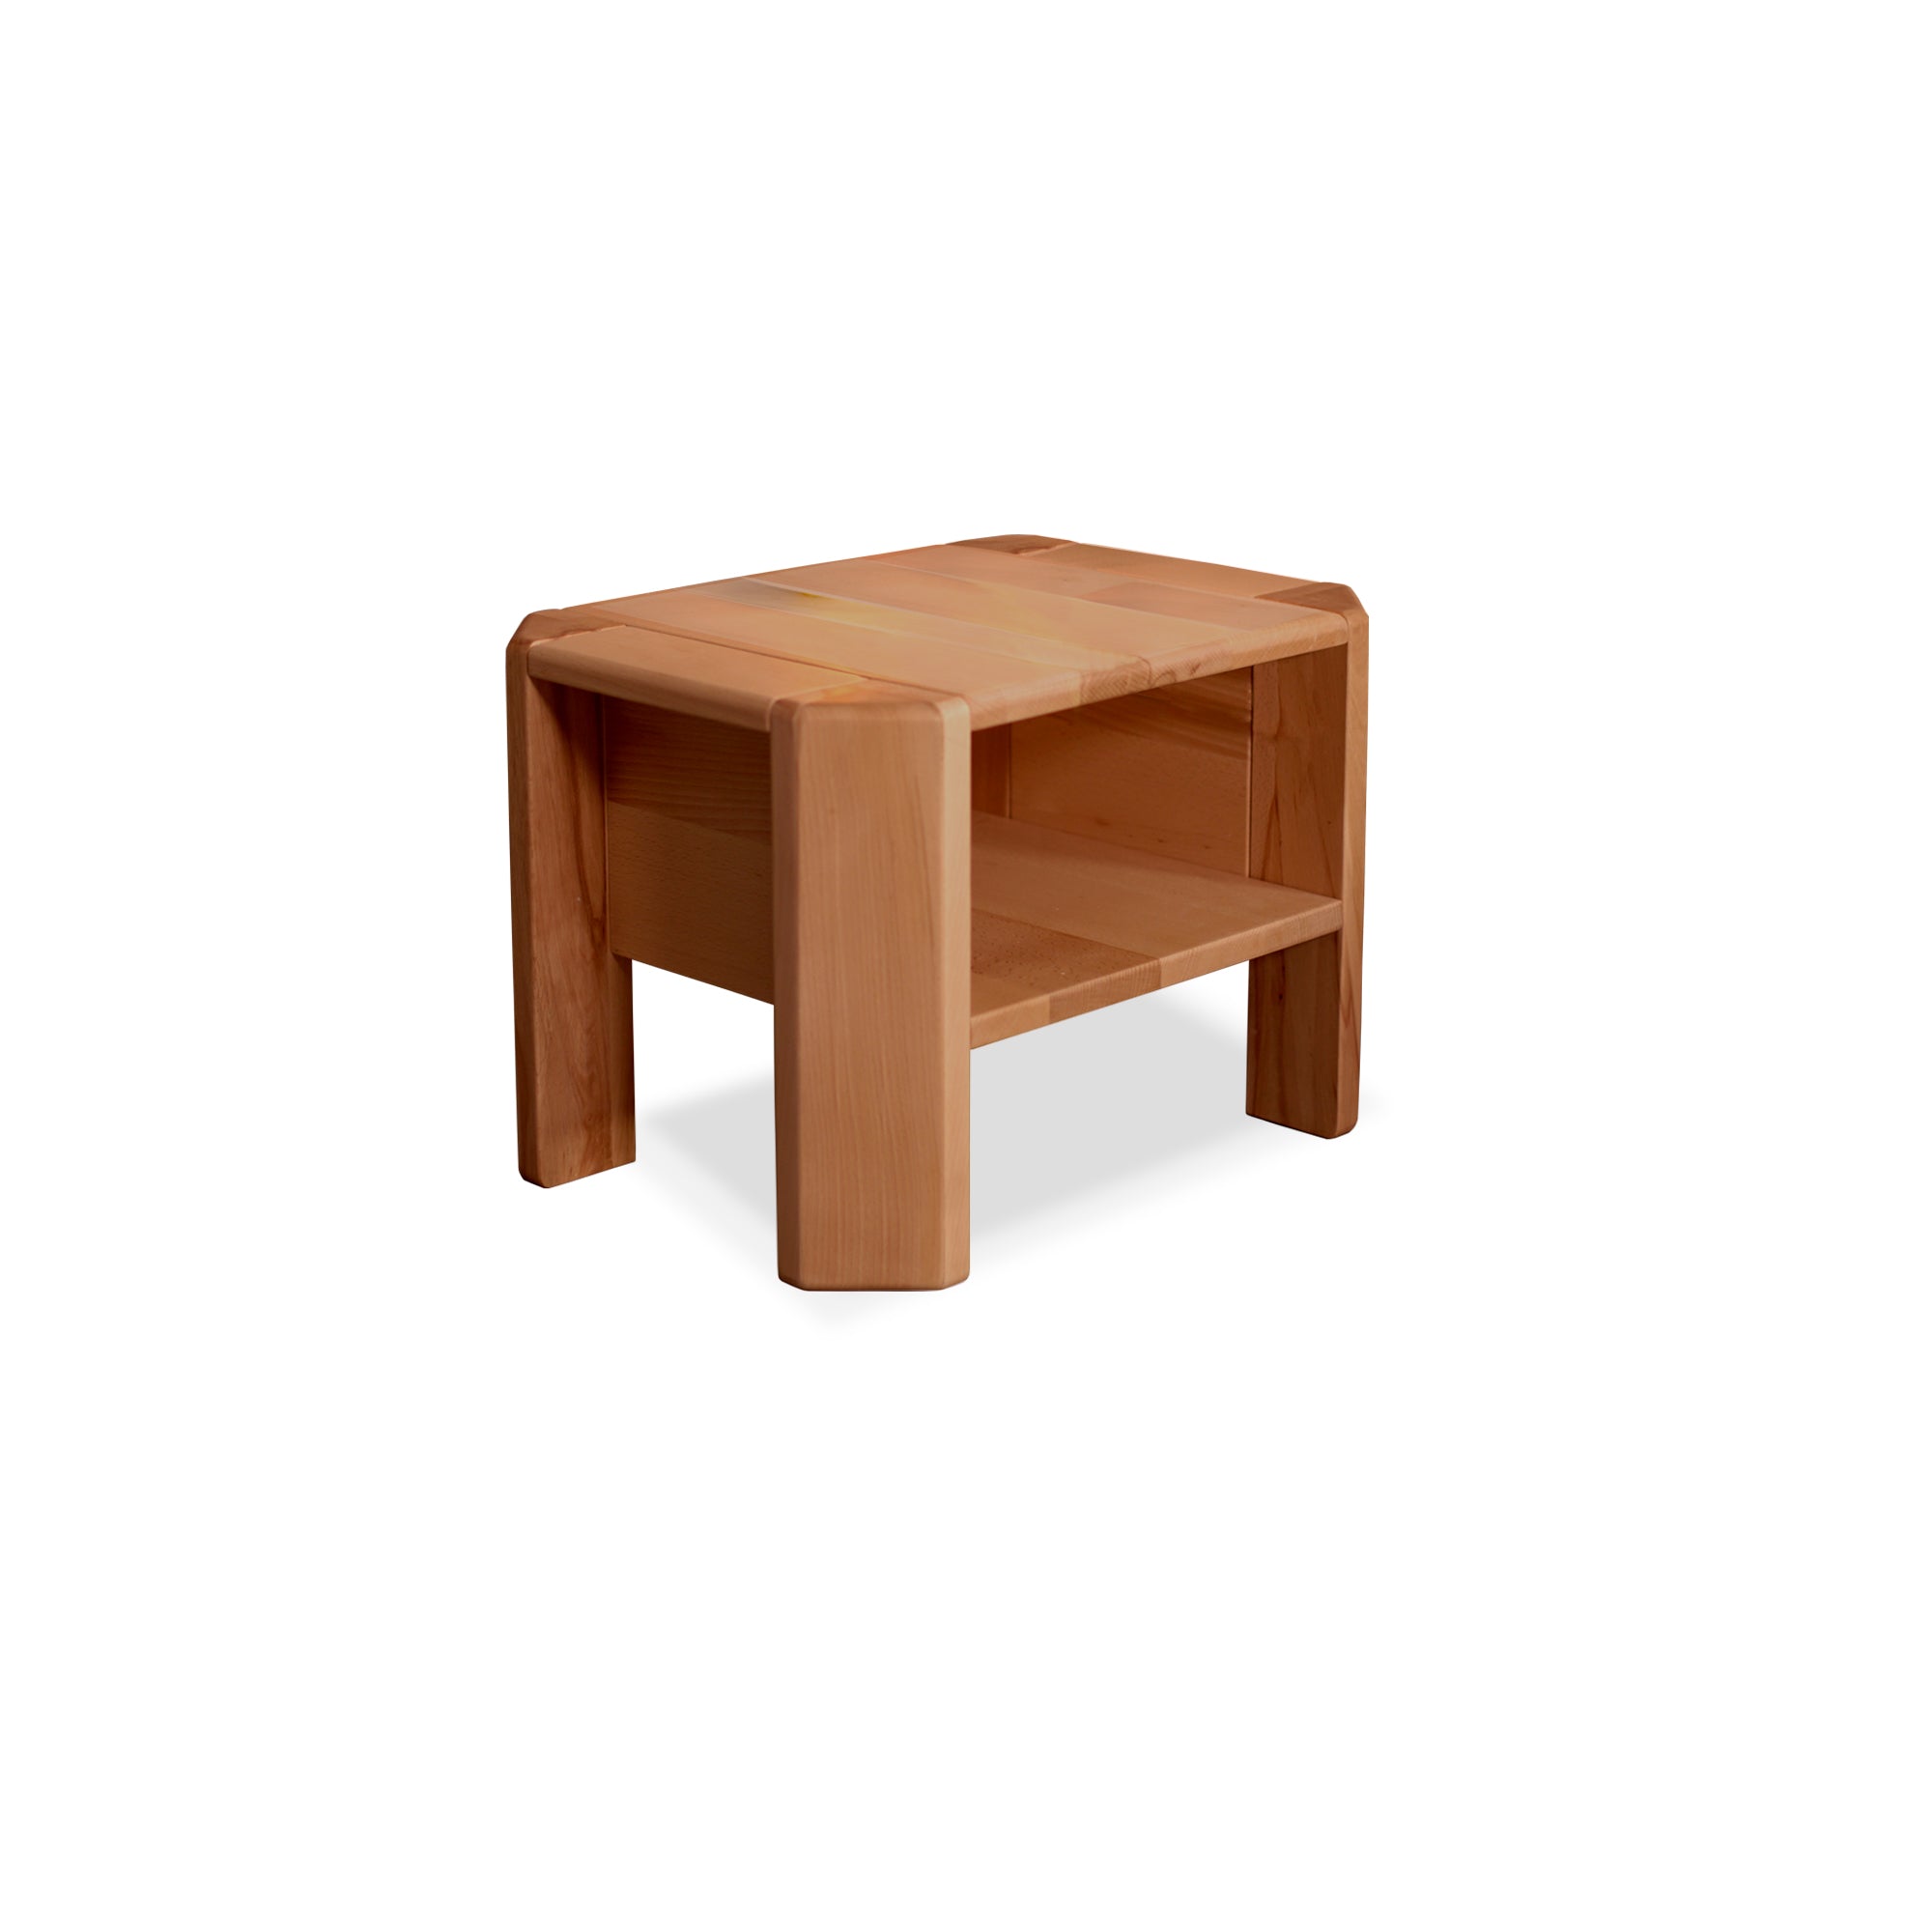 LOFT Bedside Table, Beech Wood-caramel colour-without doors-side view